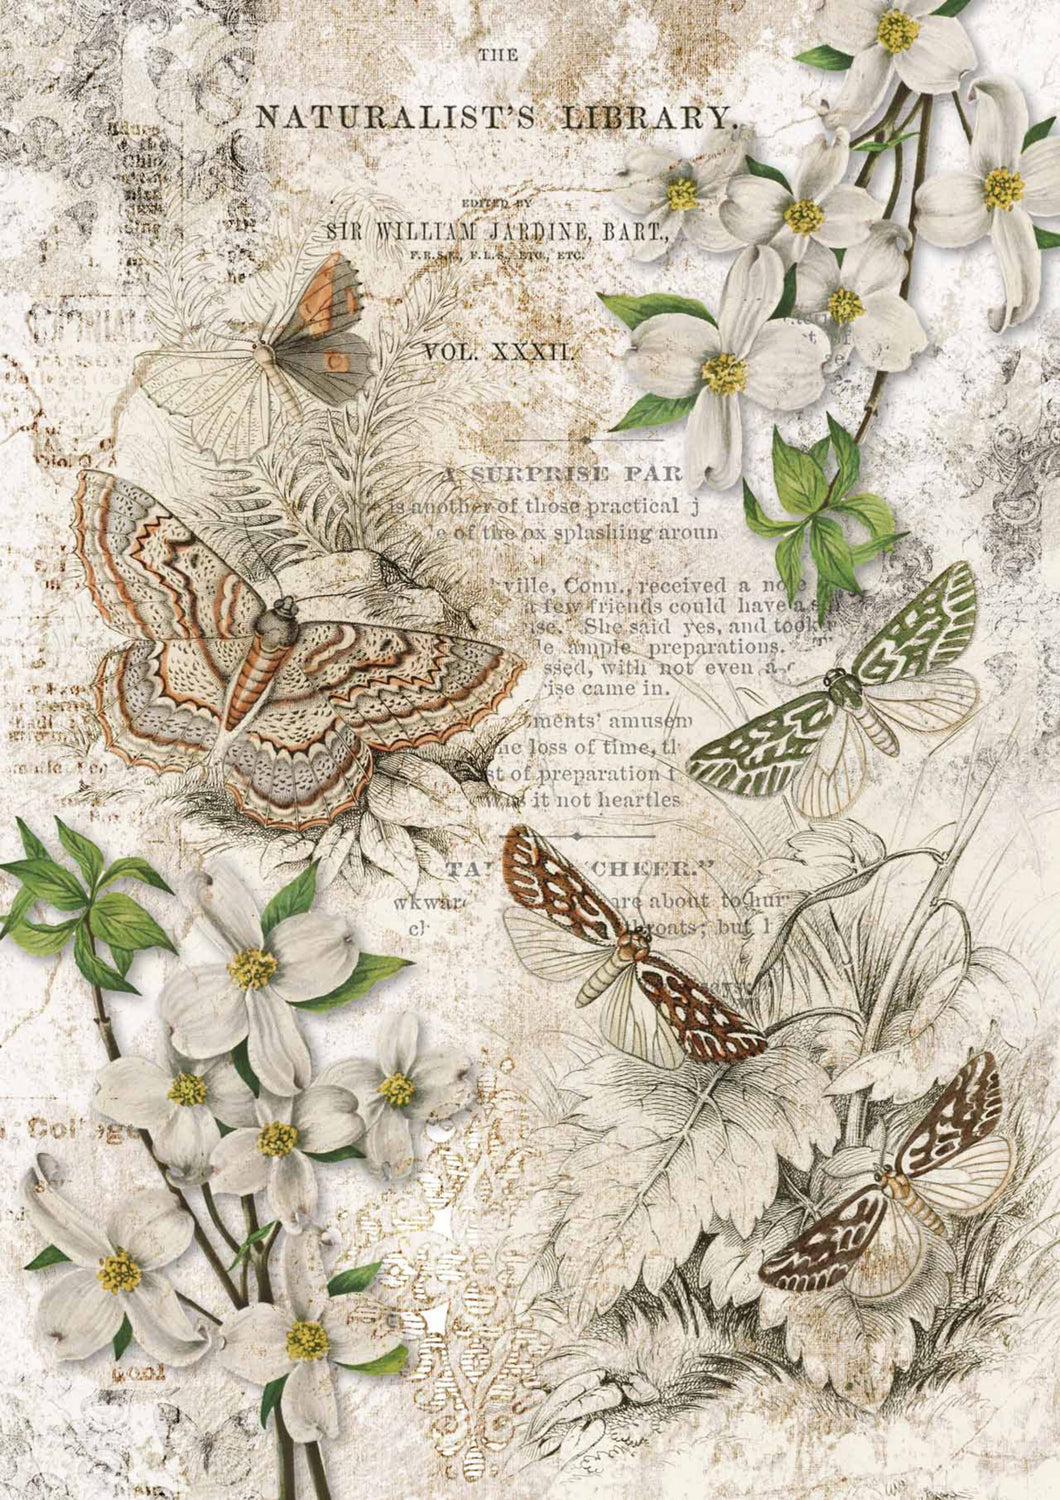 Naturalist Library Rice Paper by Decoupage Queen, A3 Size, Butterflies, Dragonflies, Florals, Vintage Book Page